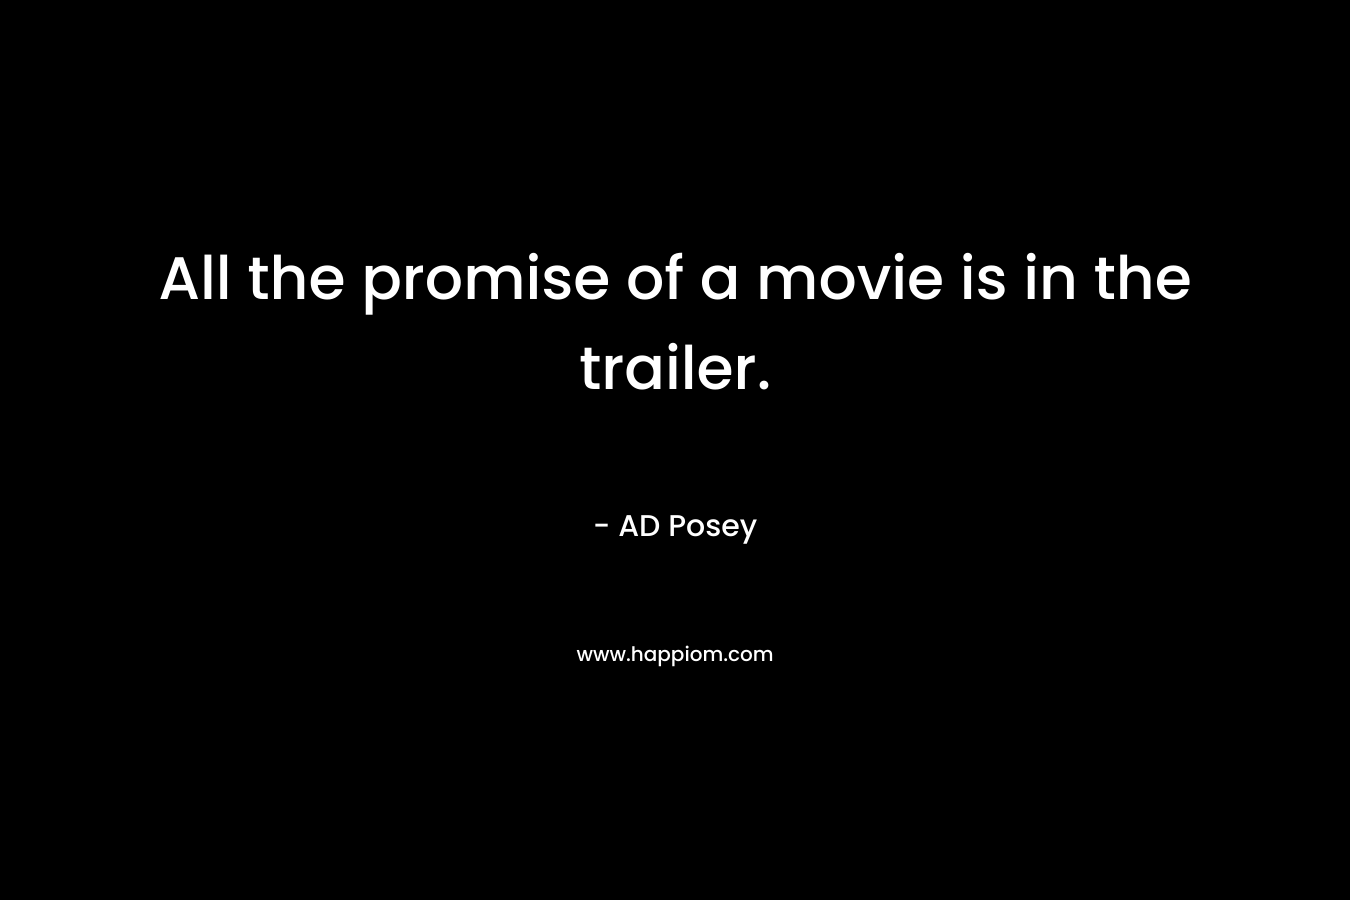 All the promise of a movie is in the trailer.